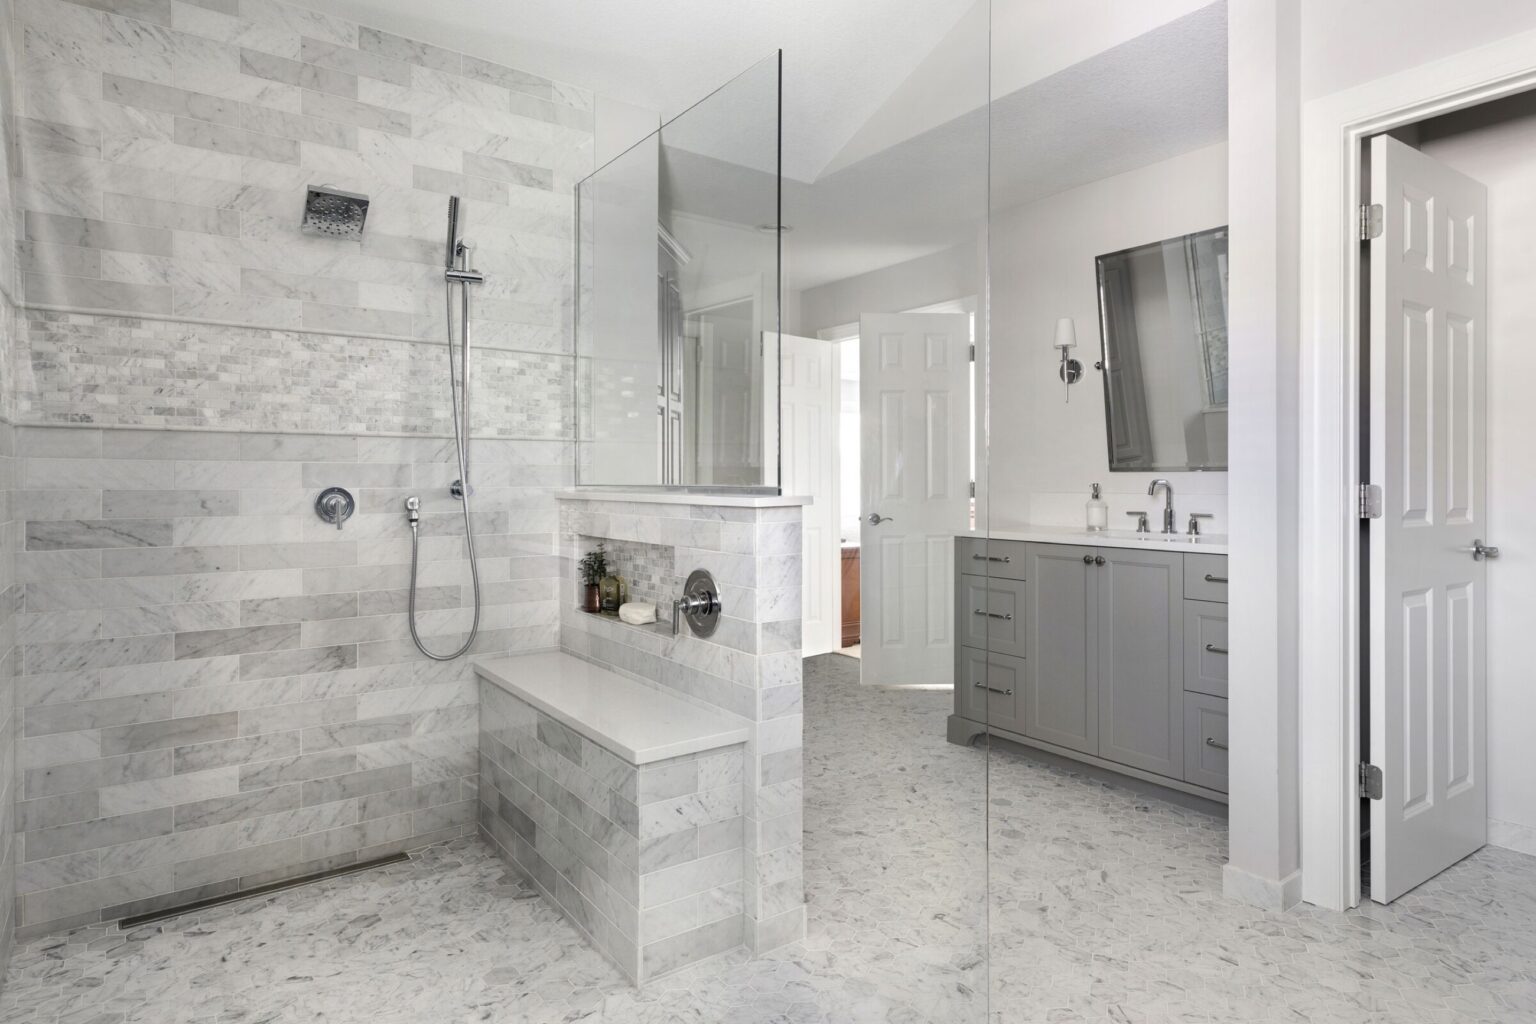 Walk-in shower with gray tile, bench, and built-in shelf.